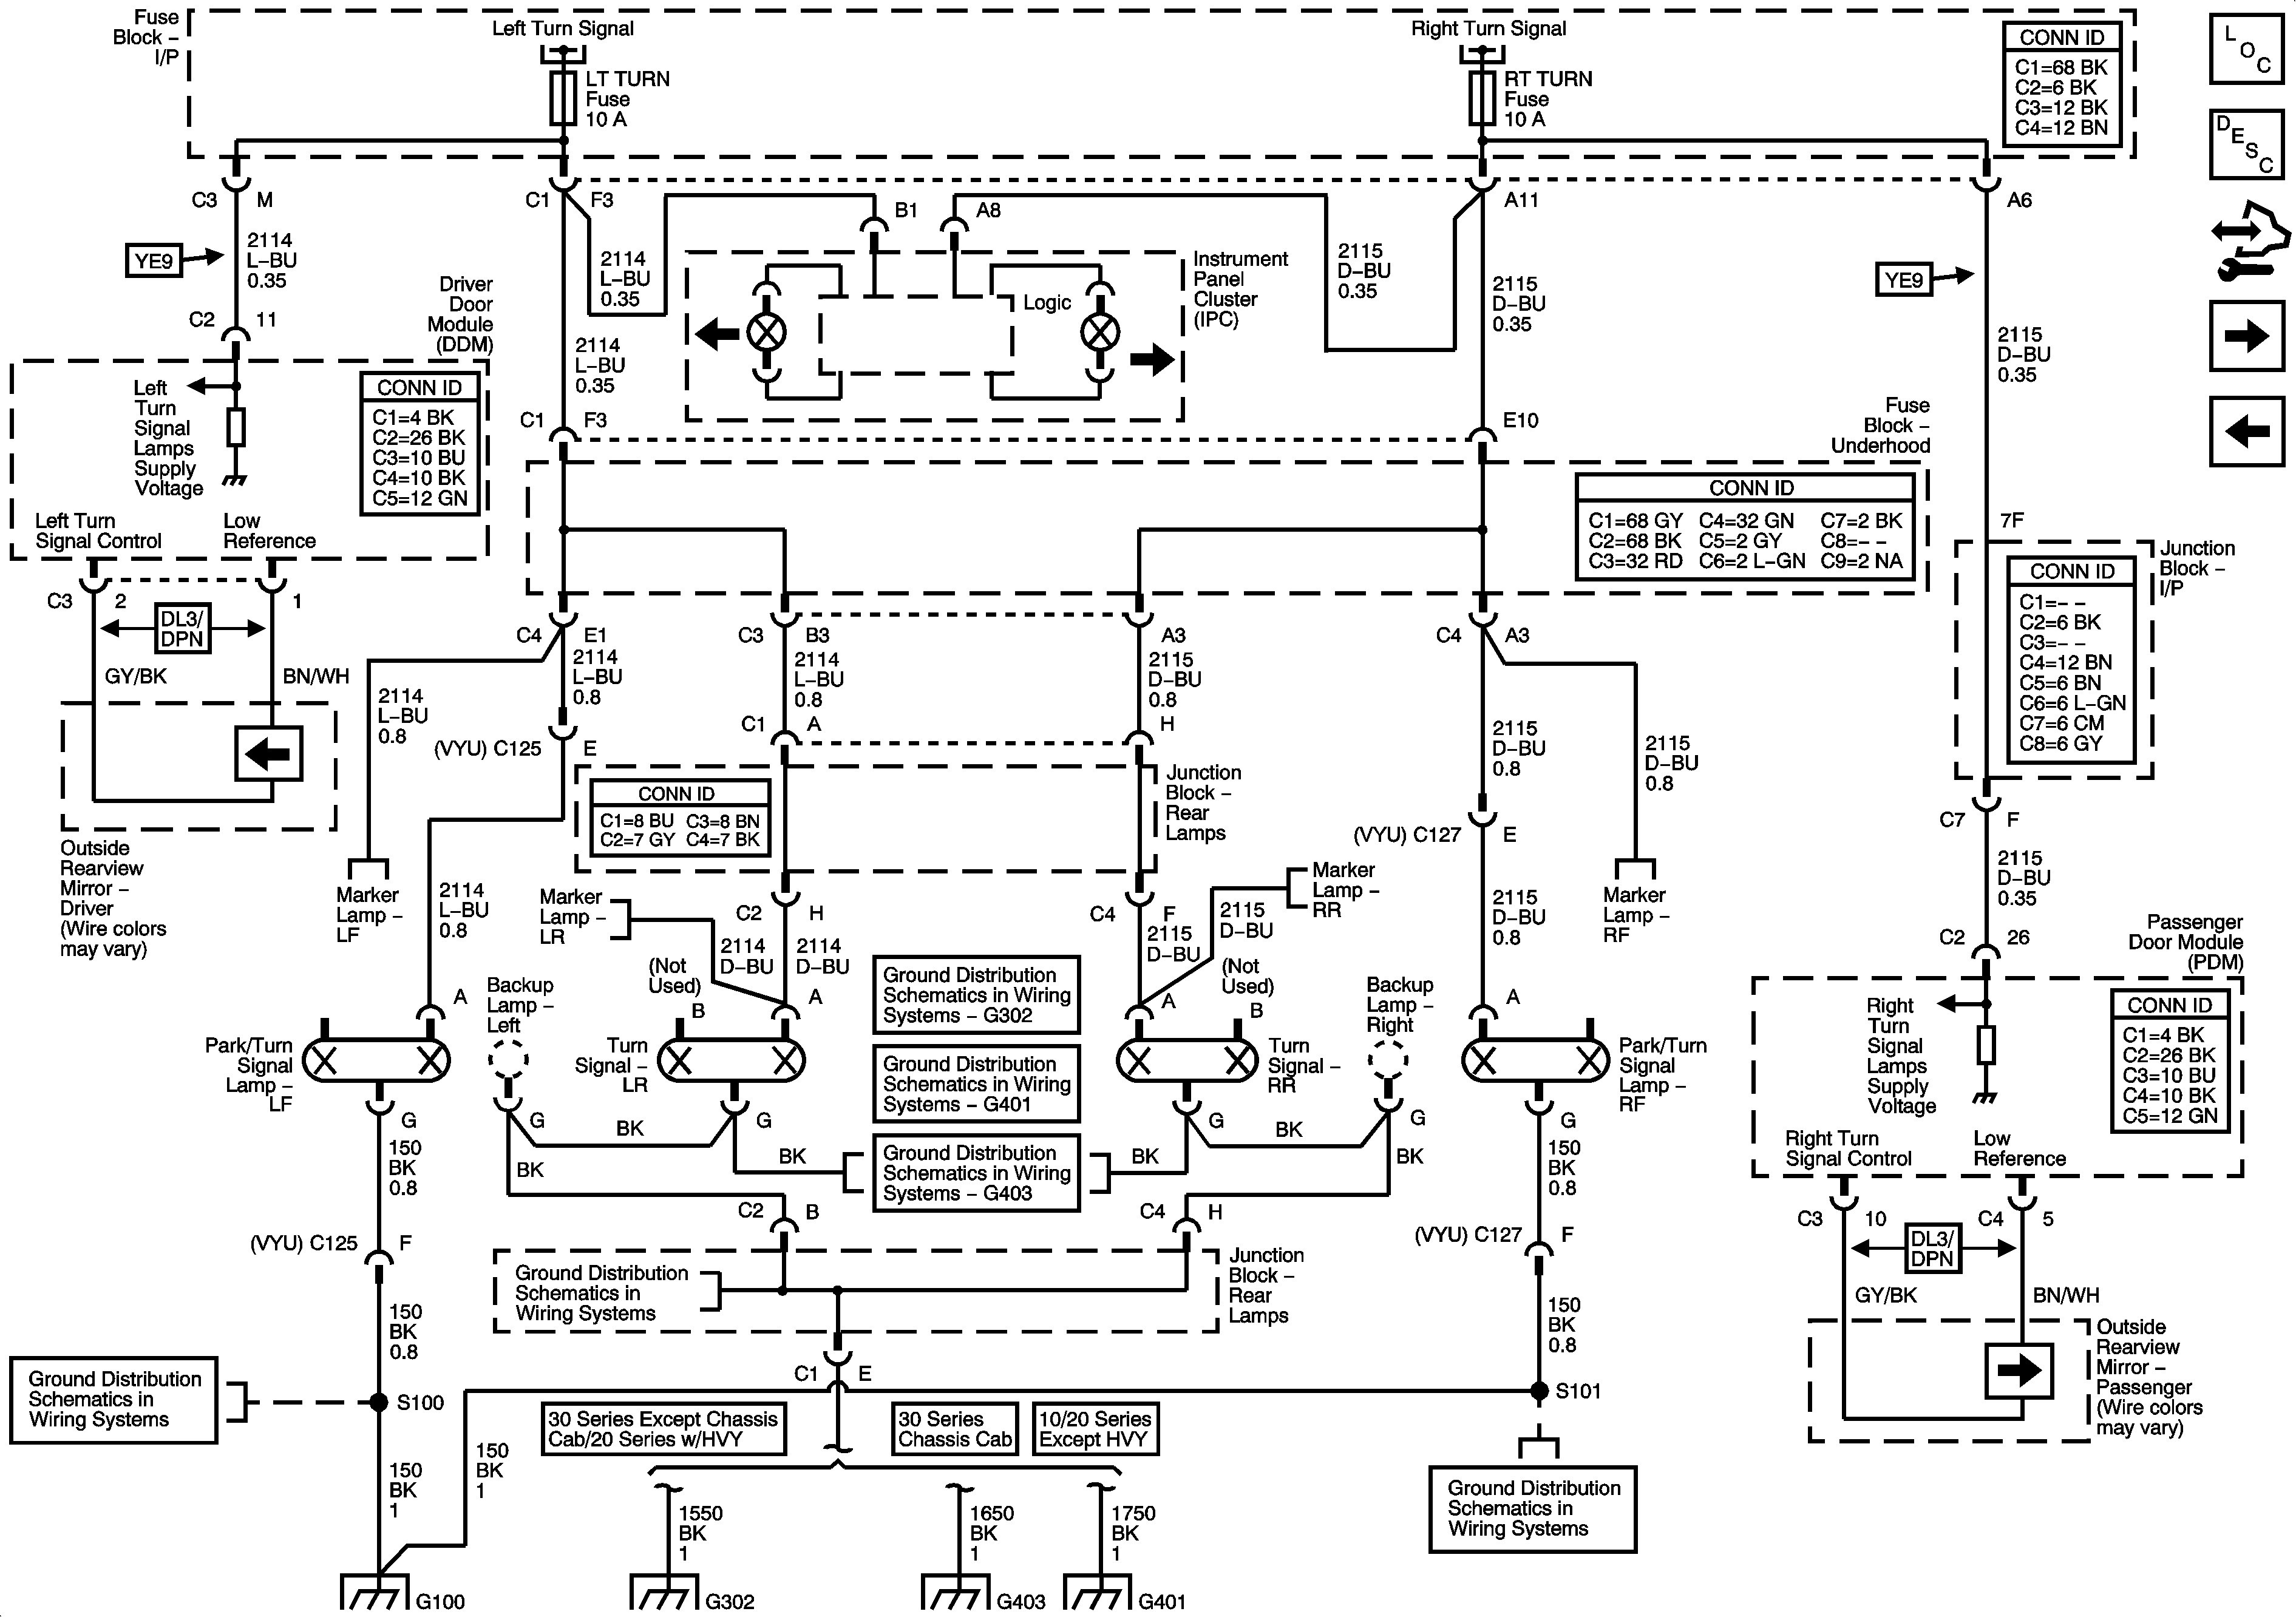 5 3 Wiring Harness Diagram Inspirational Great 2003 Chevy Wiring Diagram Ideas Electrical and Wiring